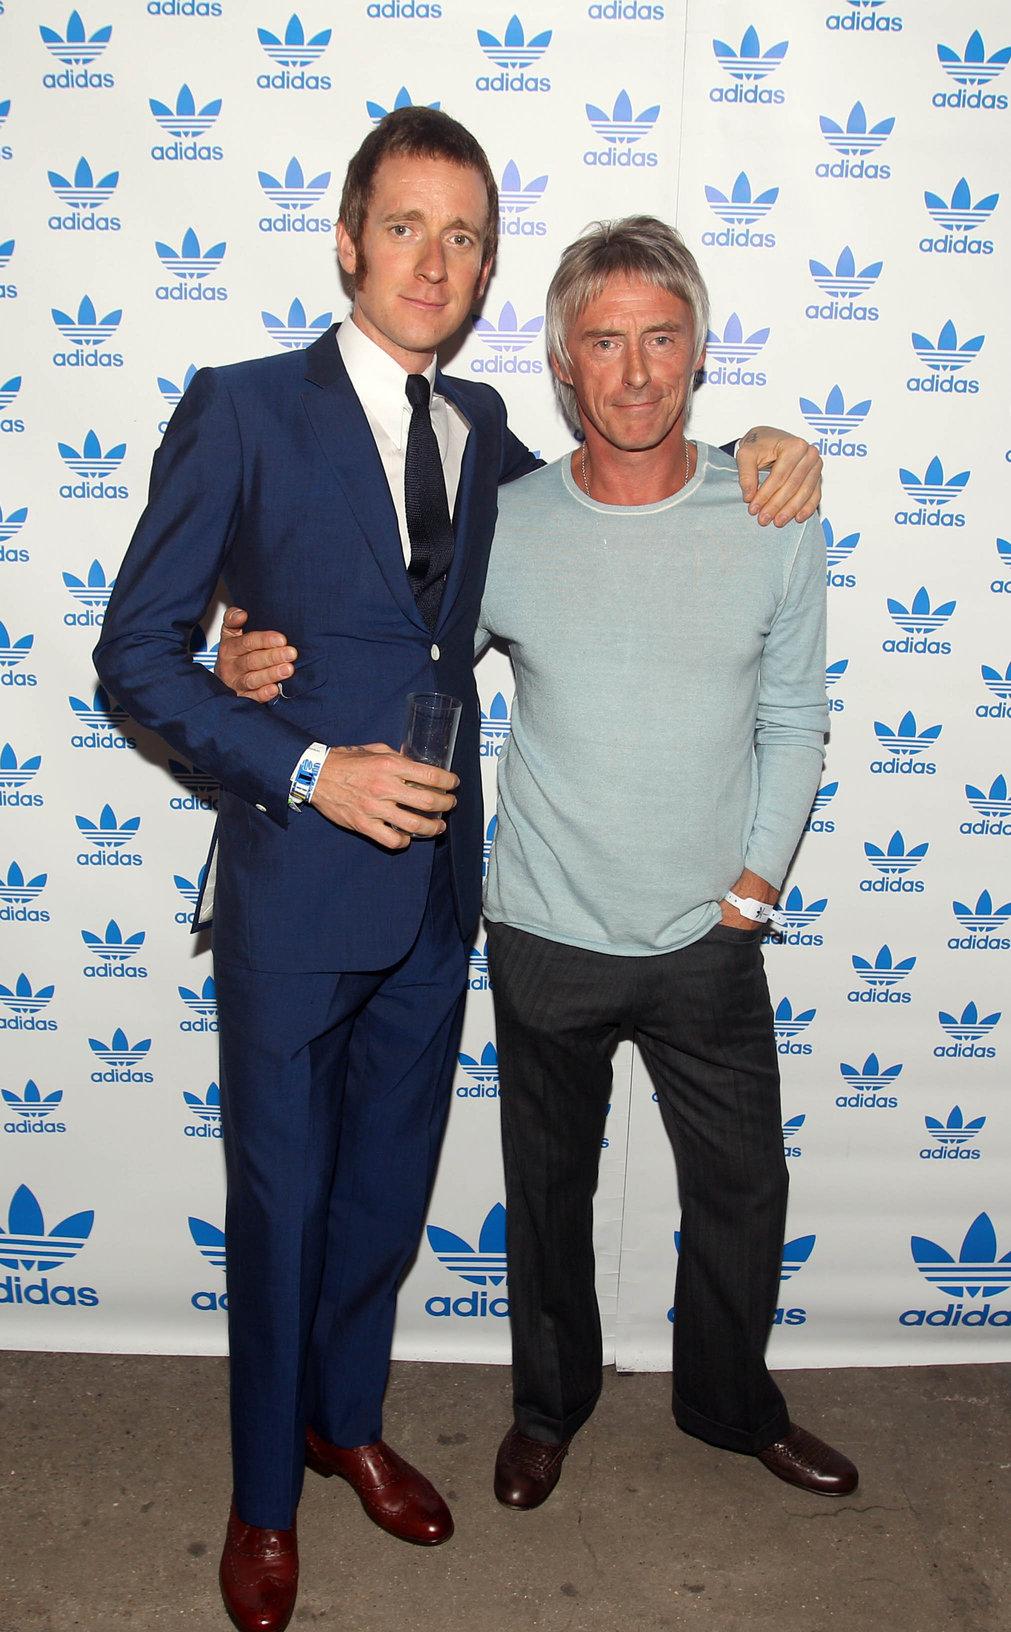 Olympic Gold Medal winner Bradley Wiggins meets his hero Paul Weller at the Adidas Underground event in east London. 